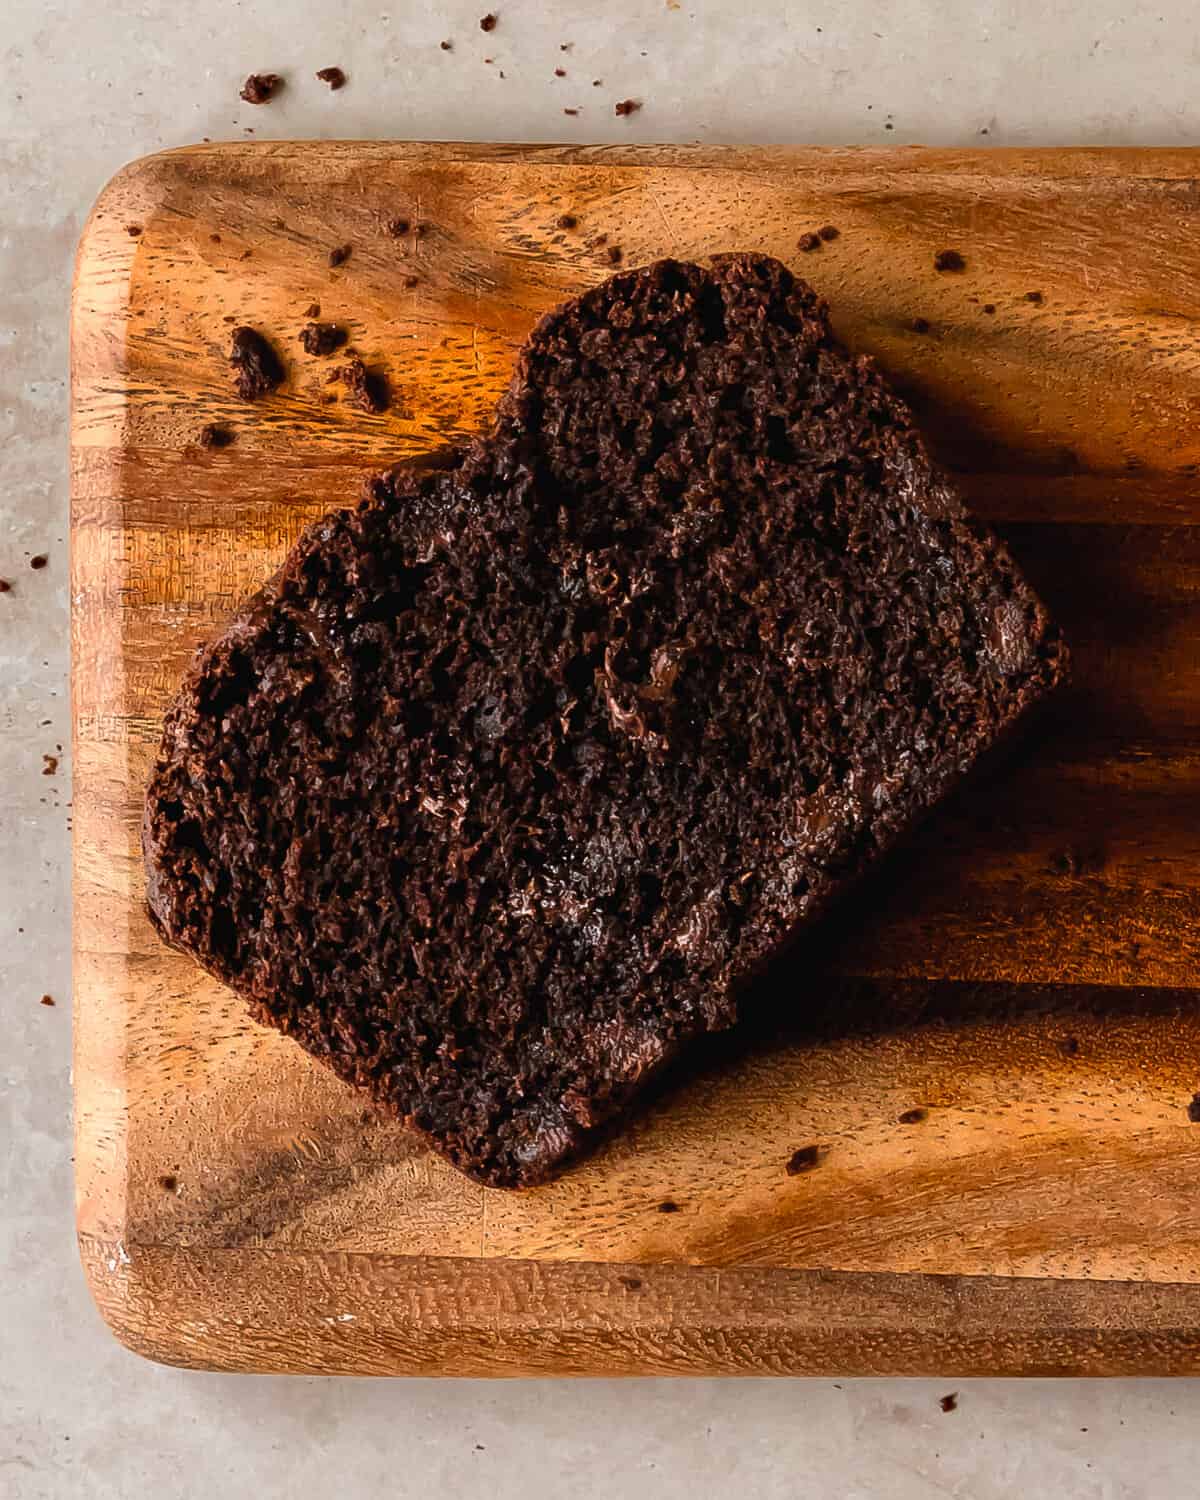 Chocolate bread is a moist, soft and rich chocolate loaf cake. This chocolate bread recipe is quick and easy to make in one bow and requires no yeast.  Make this chocolate quick bread for perfect simple and decadent breakfast, snack or dessert. 